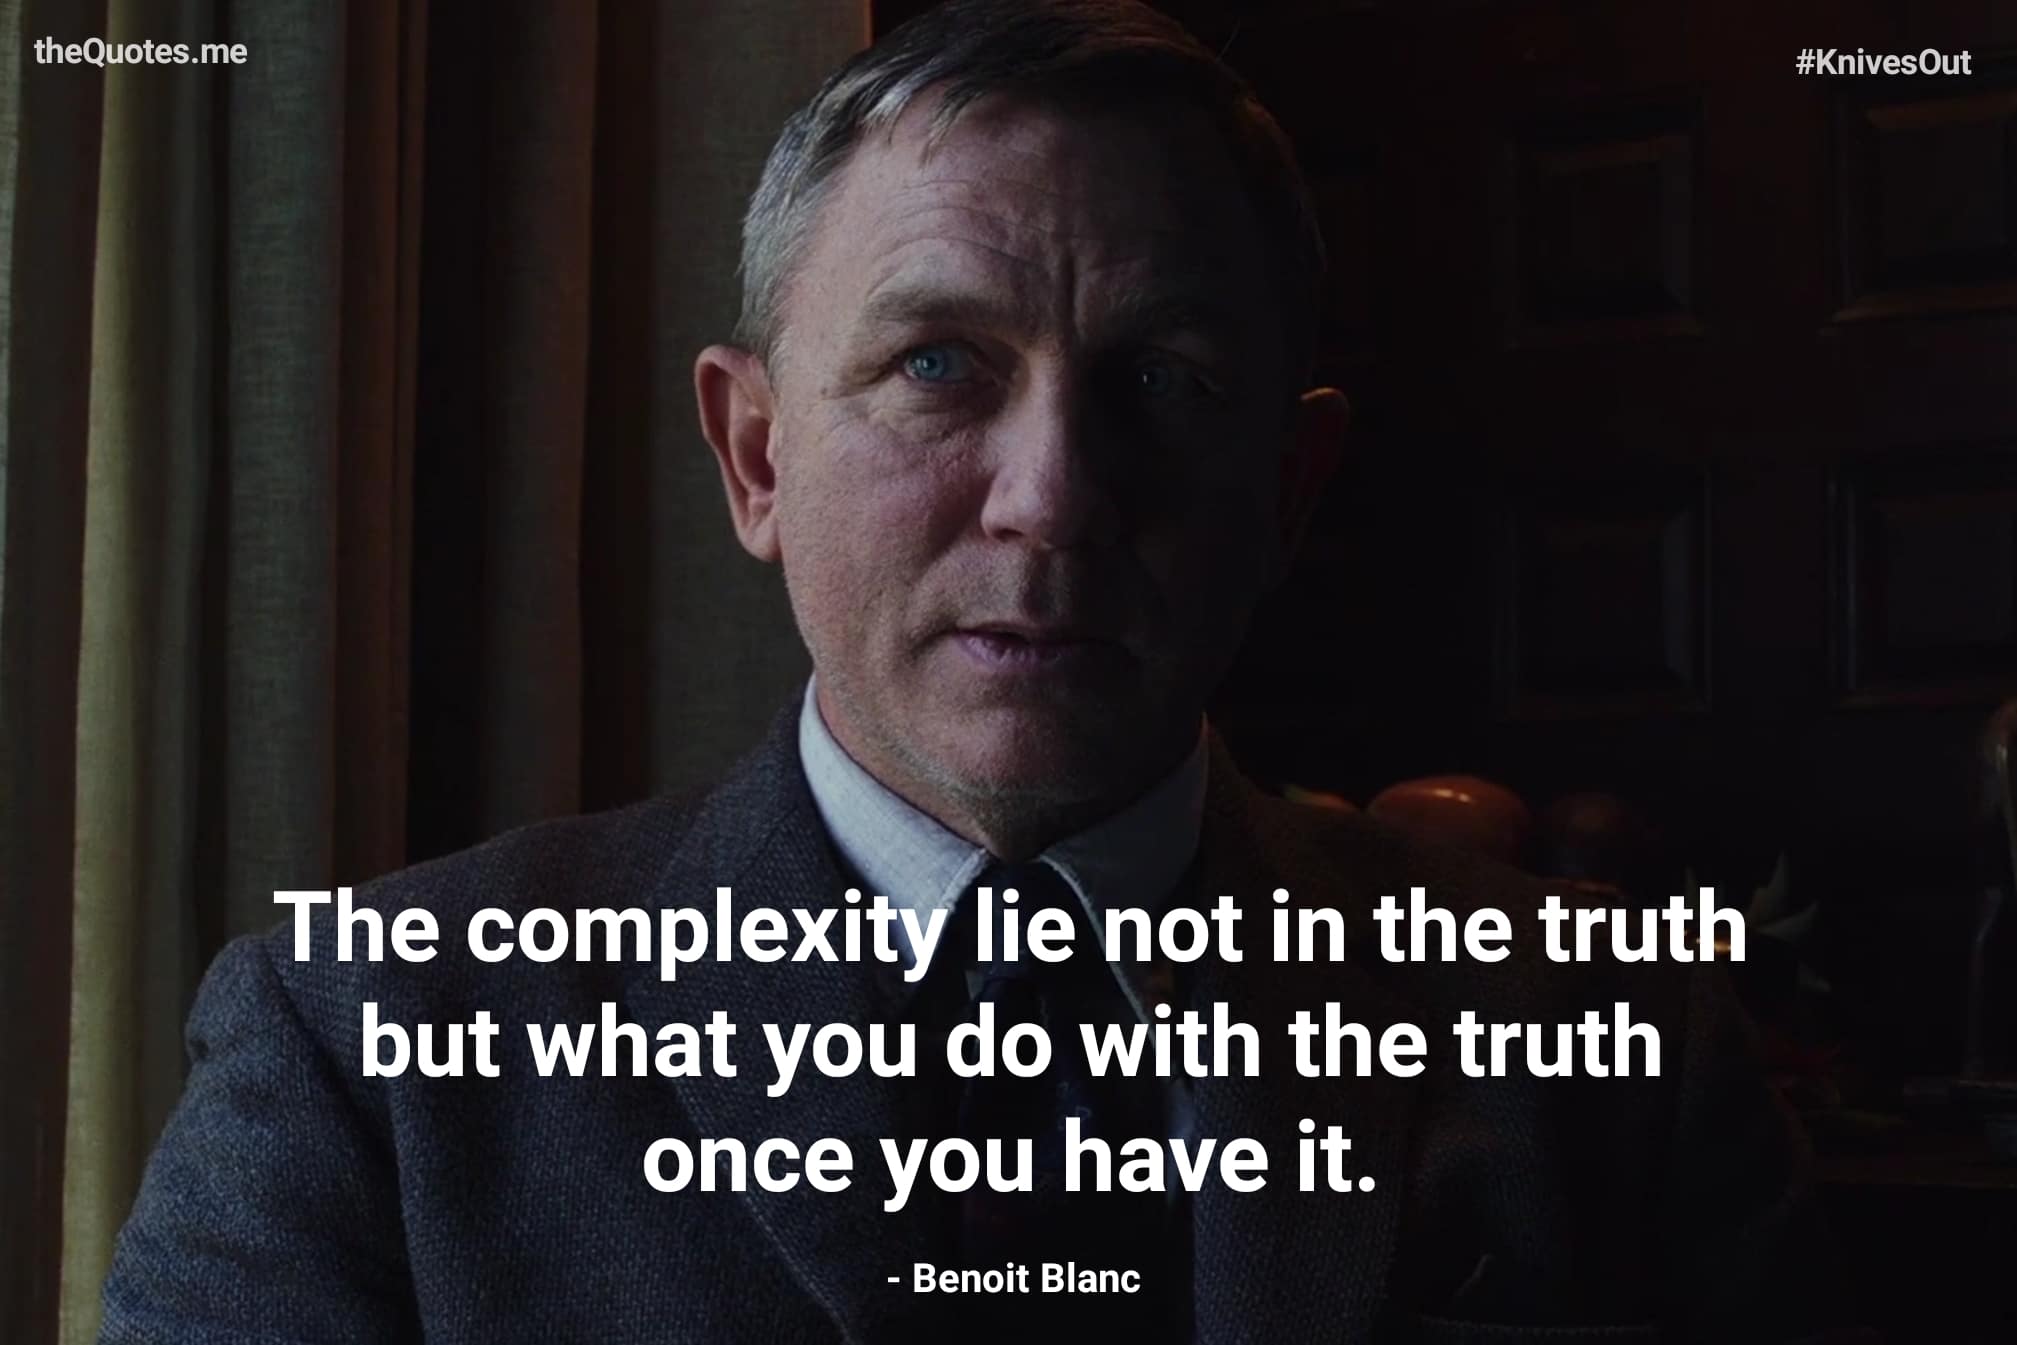 Complexity of the truth